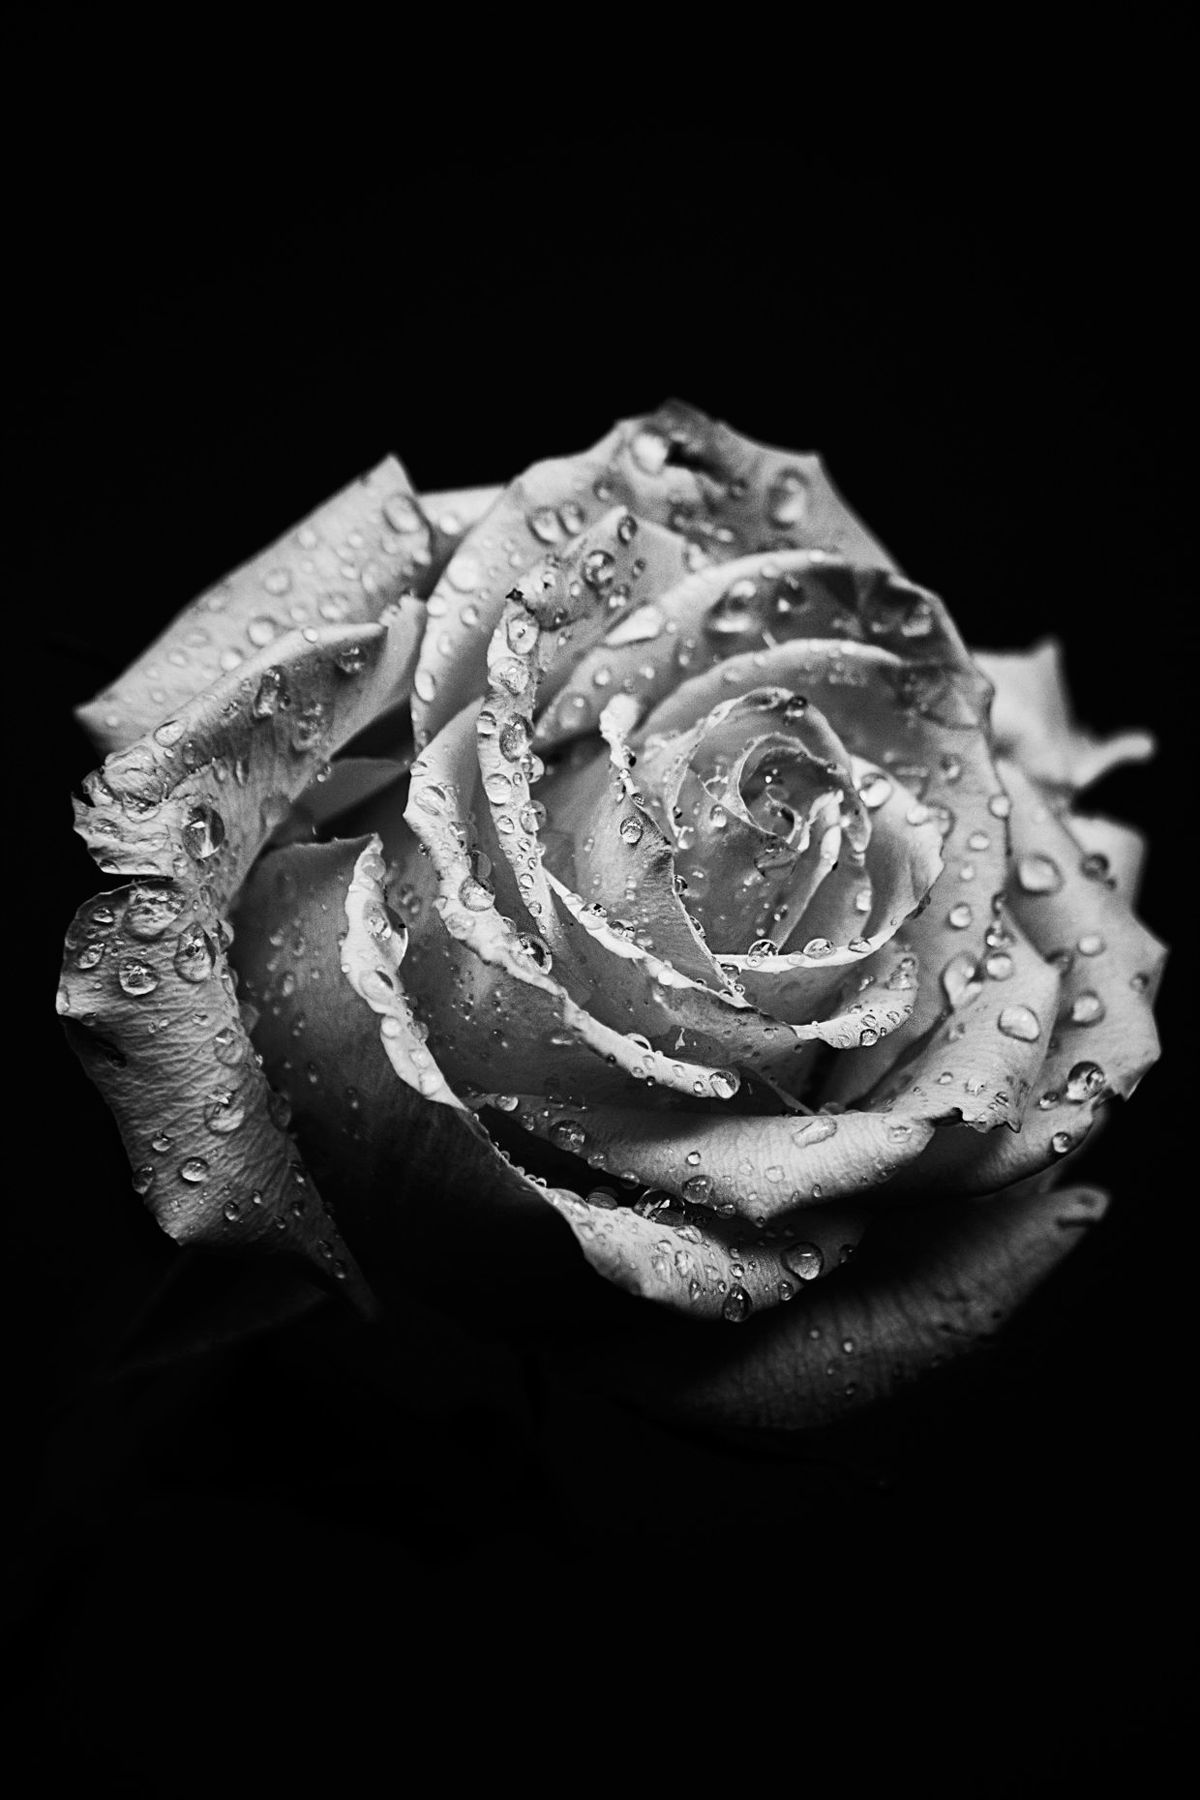 macro rose black and white Picture of the Day: Macro Rose